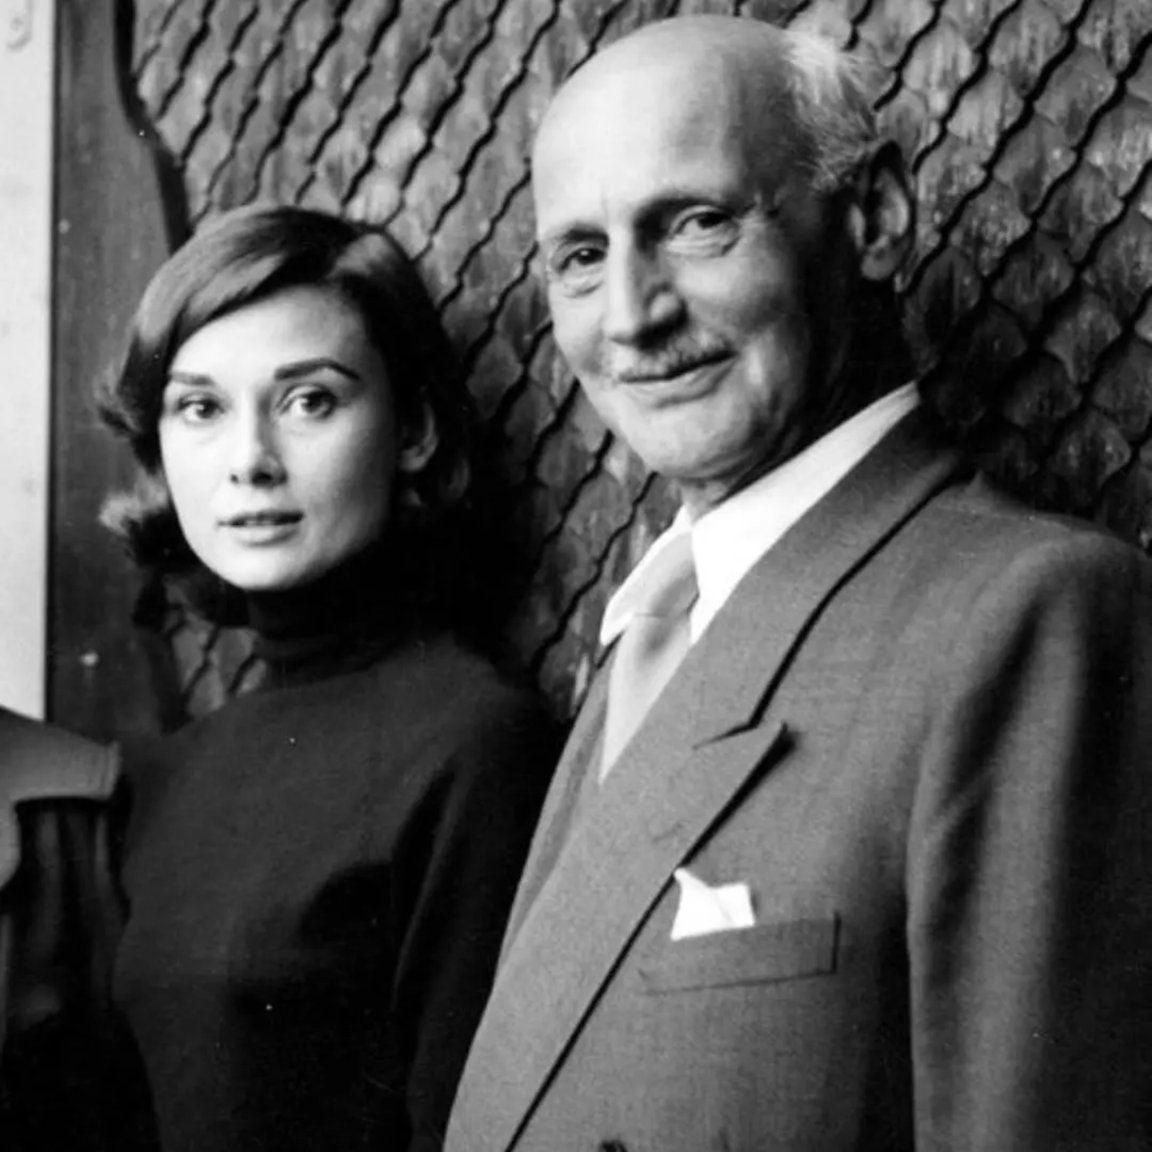 Audrey Hepburn with Otto Frank, Anne Frank’s father. As a teenager Hepburn helped the Dutch resistance in #WW2. Both Hepburn and Anne Frank were born in 1929. The two never met but Hepburn felt close to the young diarist, and they lived within 60 miles of one another. #History